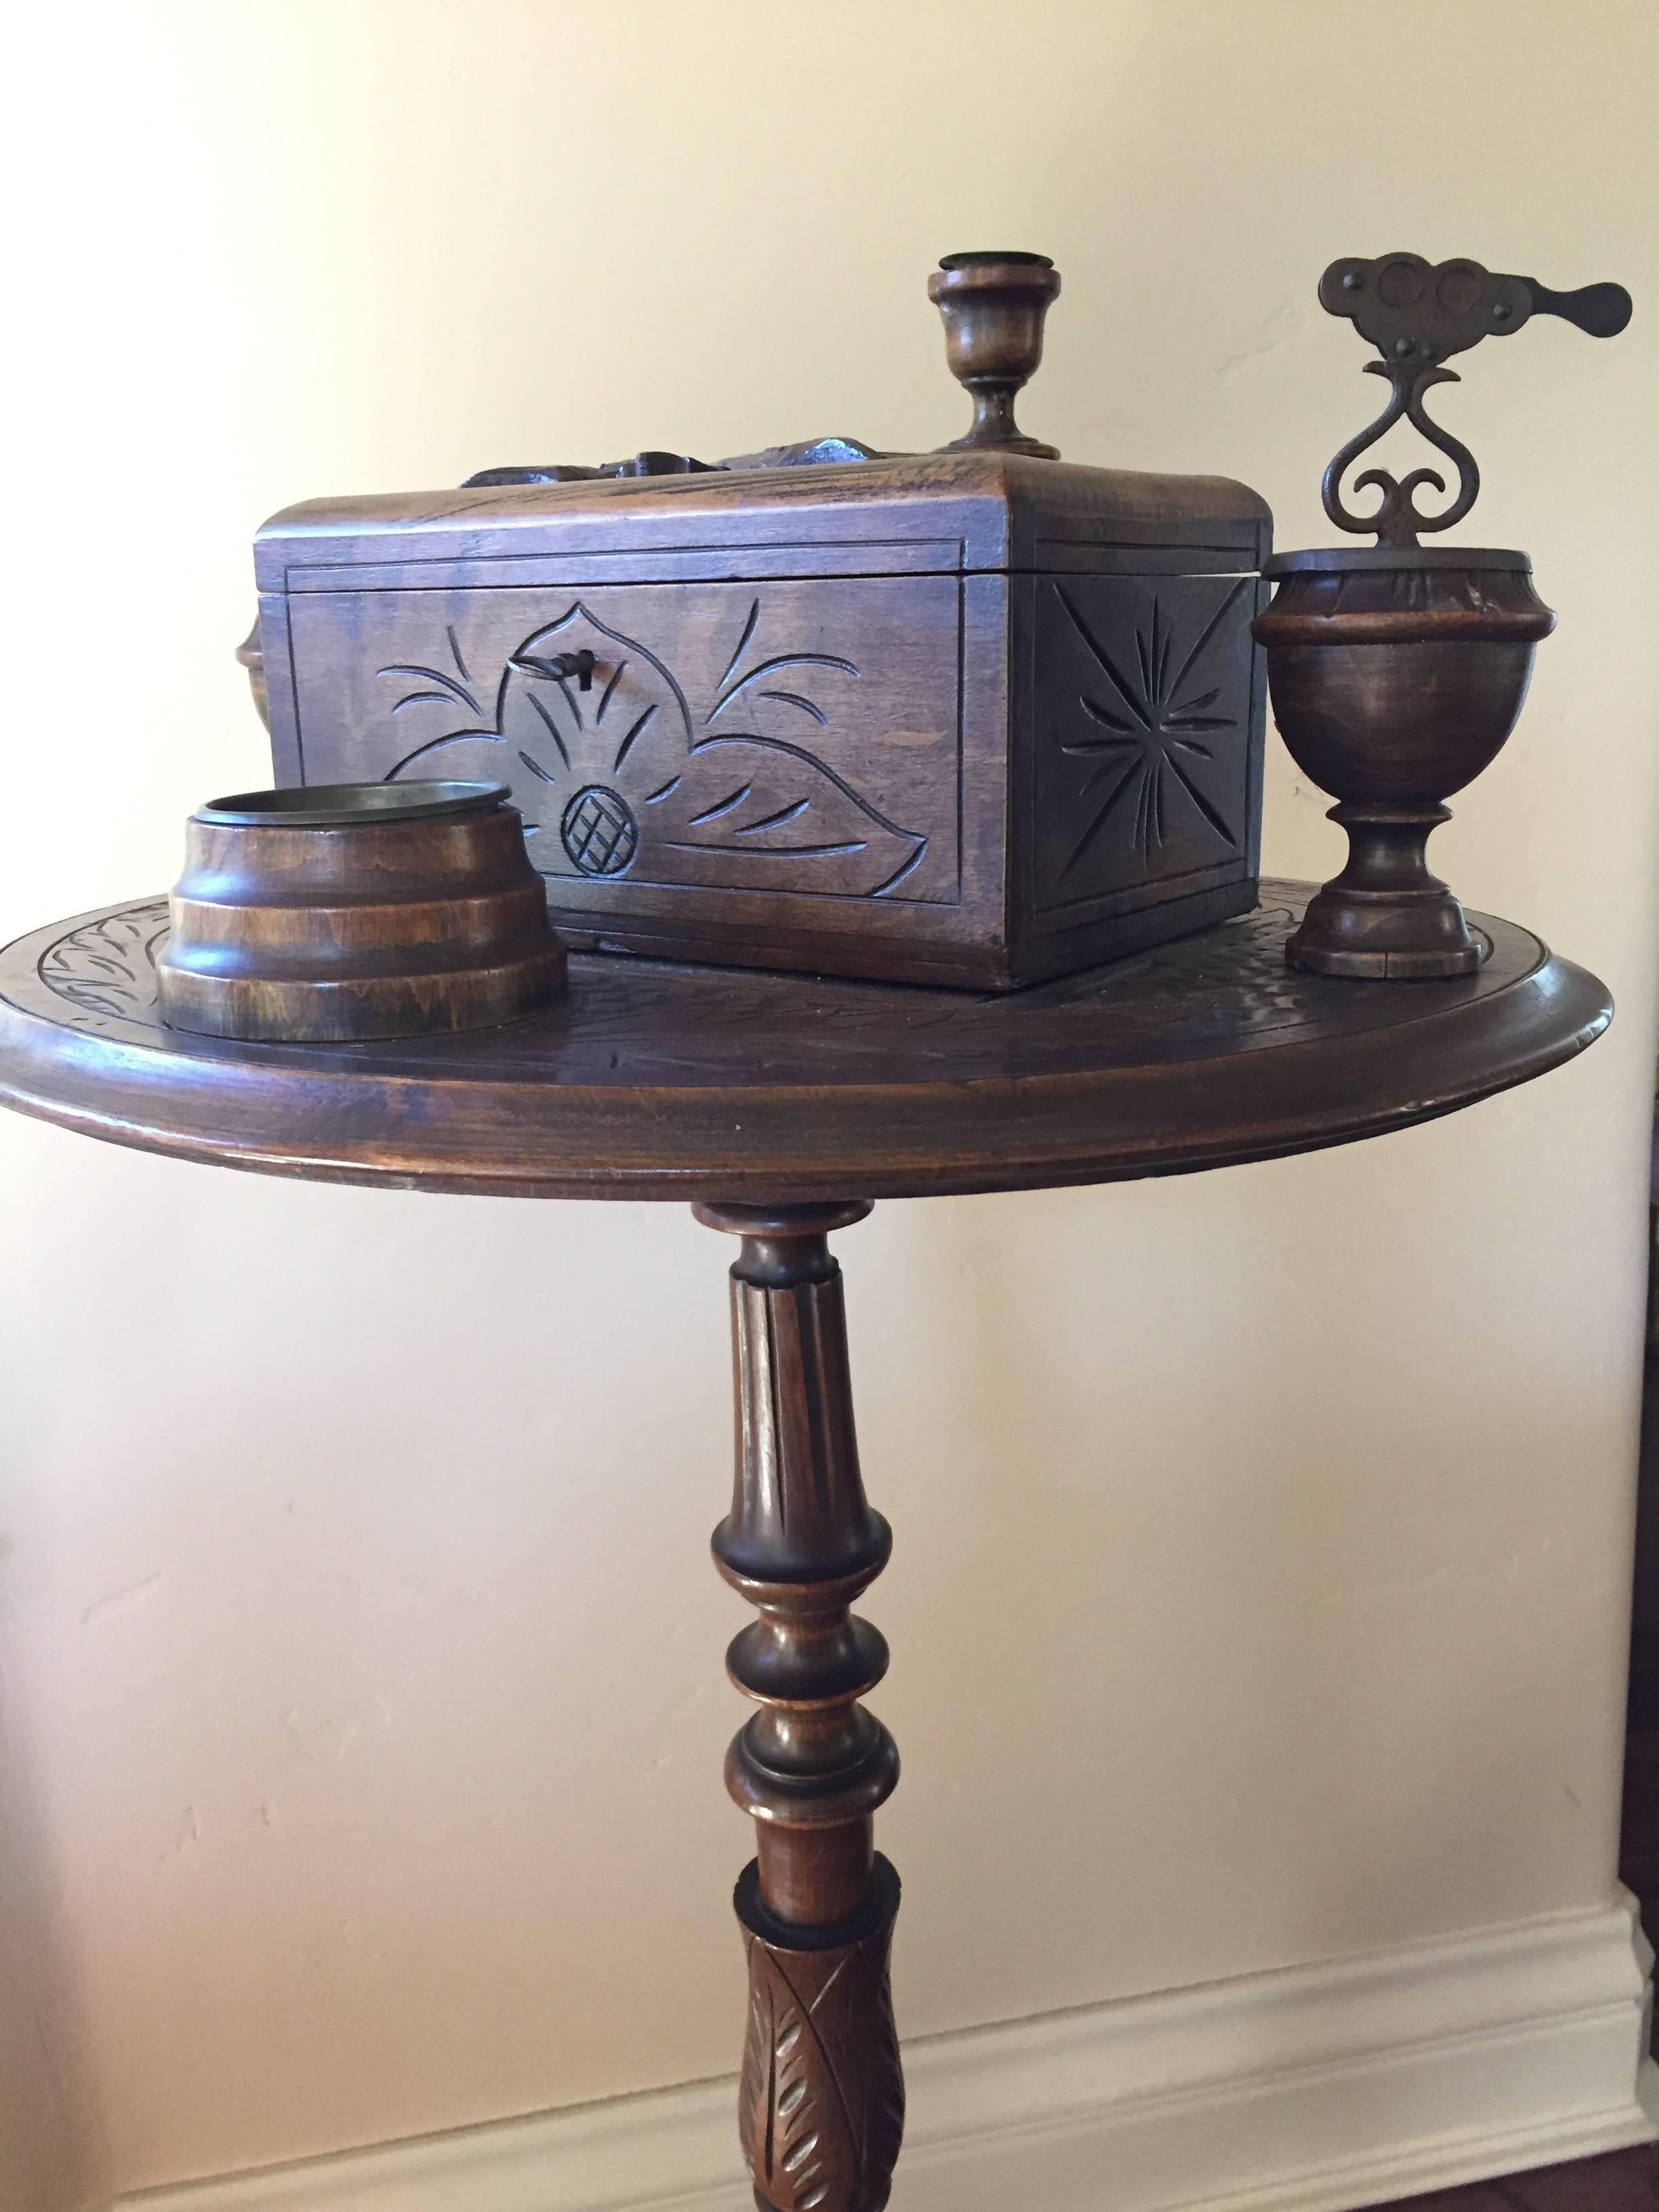 This fantastic Black Forest oak smoking stand is expertly carved and has attained a mellow patina with age, the humidor with original working lock and key surmounted with carved leaves and branches, the cigar and cigarette cutter
present and